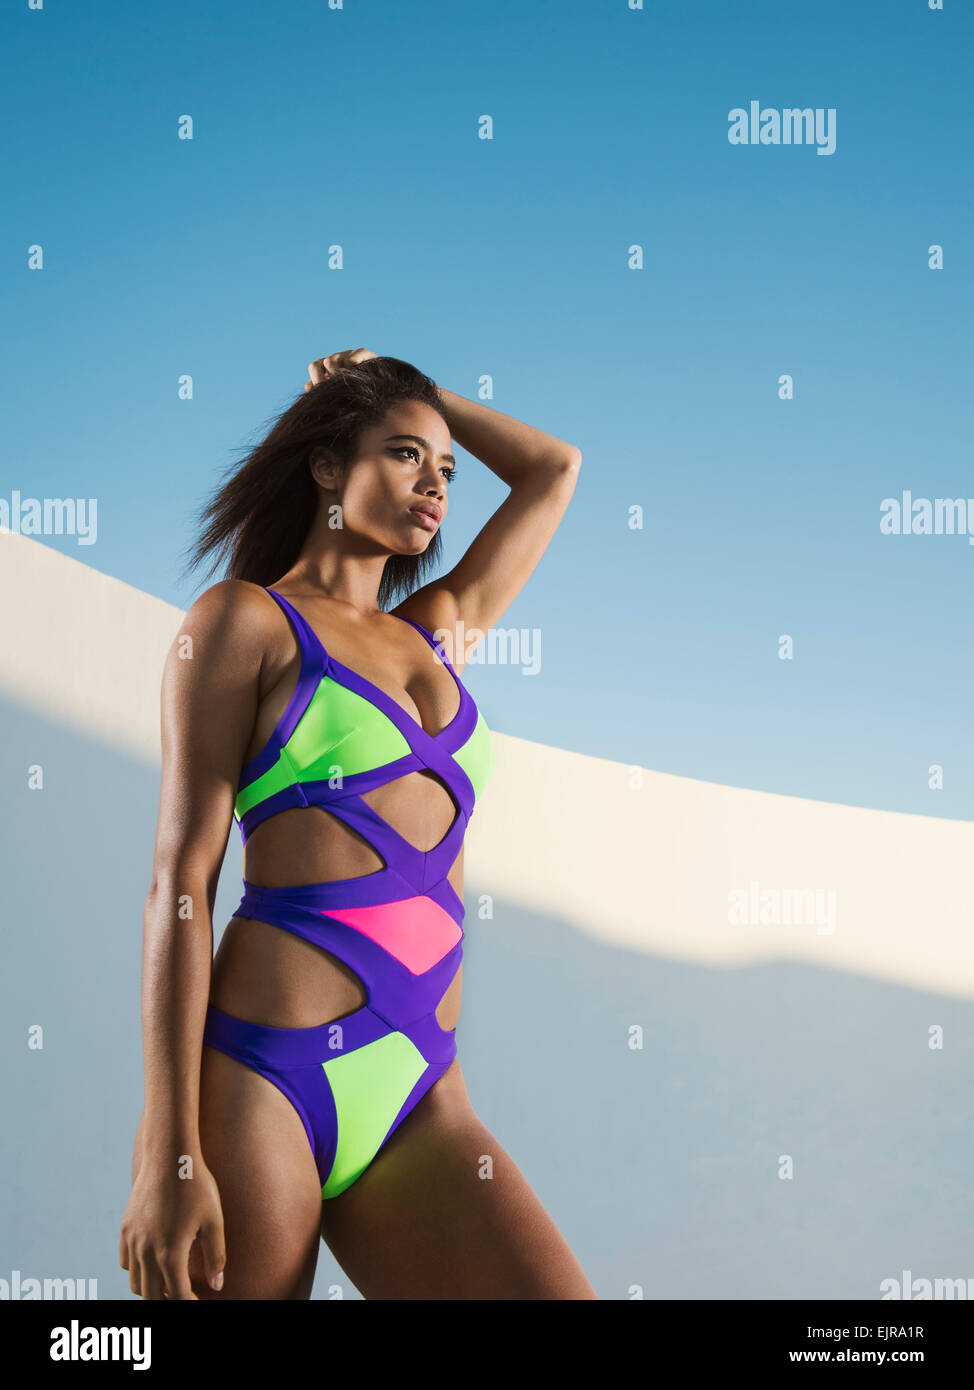 Mixed race woman wearing colorful swimsuit Stock Photo